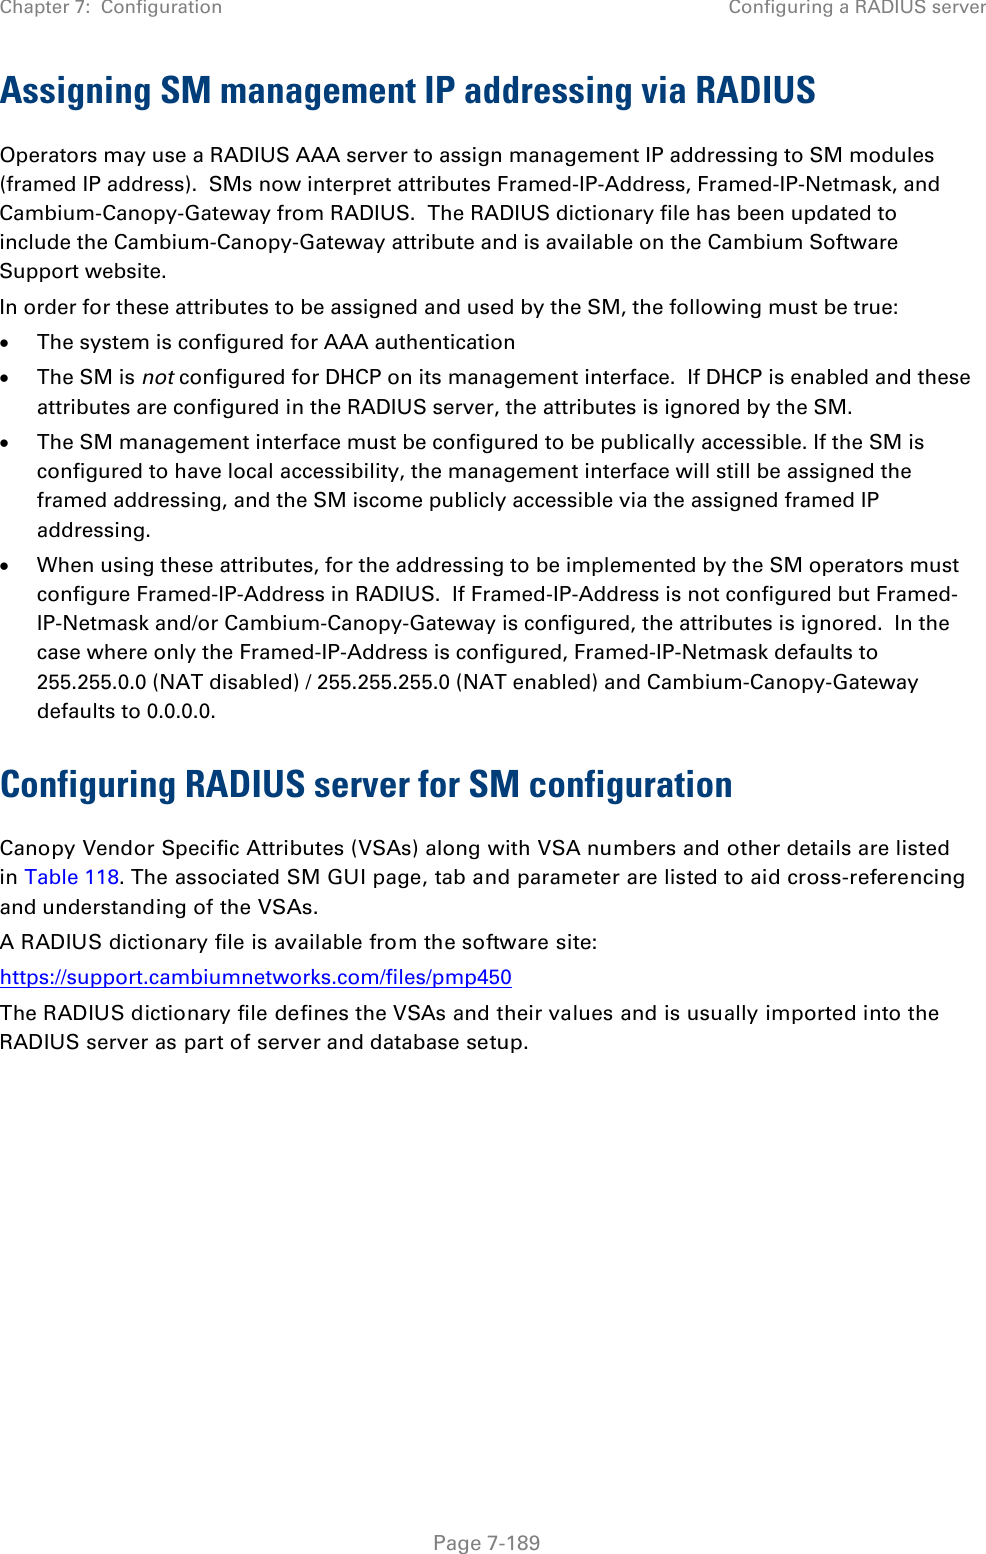 Chapter 7:  Configuration Configuring a RADIUS server   Page 7-189 Assigning SM management IP addressing via RADIUS Operators may use a RADIUS AAA server to assign management IP addressing to SM modules (framed IP address).  SMs now interpret attributes Framed-IP-Address, Framed-IP-Netmask, and Cambium-Canopy-Gateway from RADIUS.  The RADIUS dictionary file has been updated to include the Cambium-Canopy-Gateway attribute and is available on the Cambium Software Support website. In order for these attributes to be assigned and used by the SM, the following must be true: • The system is configured for AAA authentication • The SM is not configured for DHCP on its management interface.  If DHCP is enabled and these attributes are configured in the RADIUS server, the attributes is ignored by the SM. • The SM management interface must be configured to be publically accessible. If the SM is configured to have local accessibility, the management interface will still be assigned the framed addressing, and the SM iscome publicly accessible via the assigned framed IP addressing. • When using these attributes, for the addressing to be implemented by the SM operators must configure Framed-IP-Address in RADIUS.  If Framed-IP-Address is not configured but Framed-IP-Netmask and/or Cambium-Canopy-Gateway is configured, the attributes is ignored.  In the case where only the Framed-IP-Address is configured, Framed-IP-Netmask defaults to 255.255.0.0 (NAT disabled) / 255.255.255.0 (NAT enabled) and Cambium-Canopy-Gateway defaults to 0.0.0.0. Configuring RADIUS server for SM configuration Canopy Vendor Specific Attributes (VSAs) along with VSA numbers and other details are listed in Table 118. The associated SM GUI page, tab and parameter are listed to aid cross-referencing and understanding of the VSAs. A RADIUS dictionary file is available from the software site:  https://support.cambiumnetworks.com/files/pmp450 The RADIUS dictionary file defines the VSAs and their values and is usually imported into the RADIUS server as part of server and database setup.  